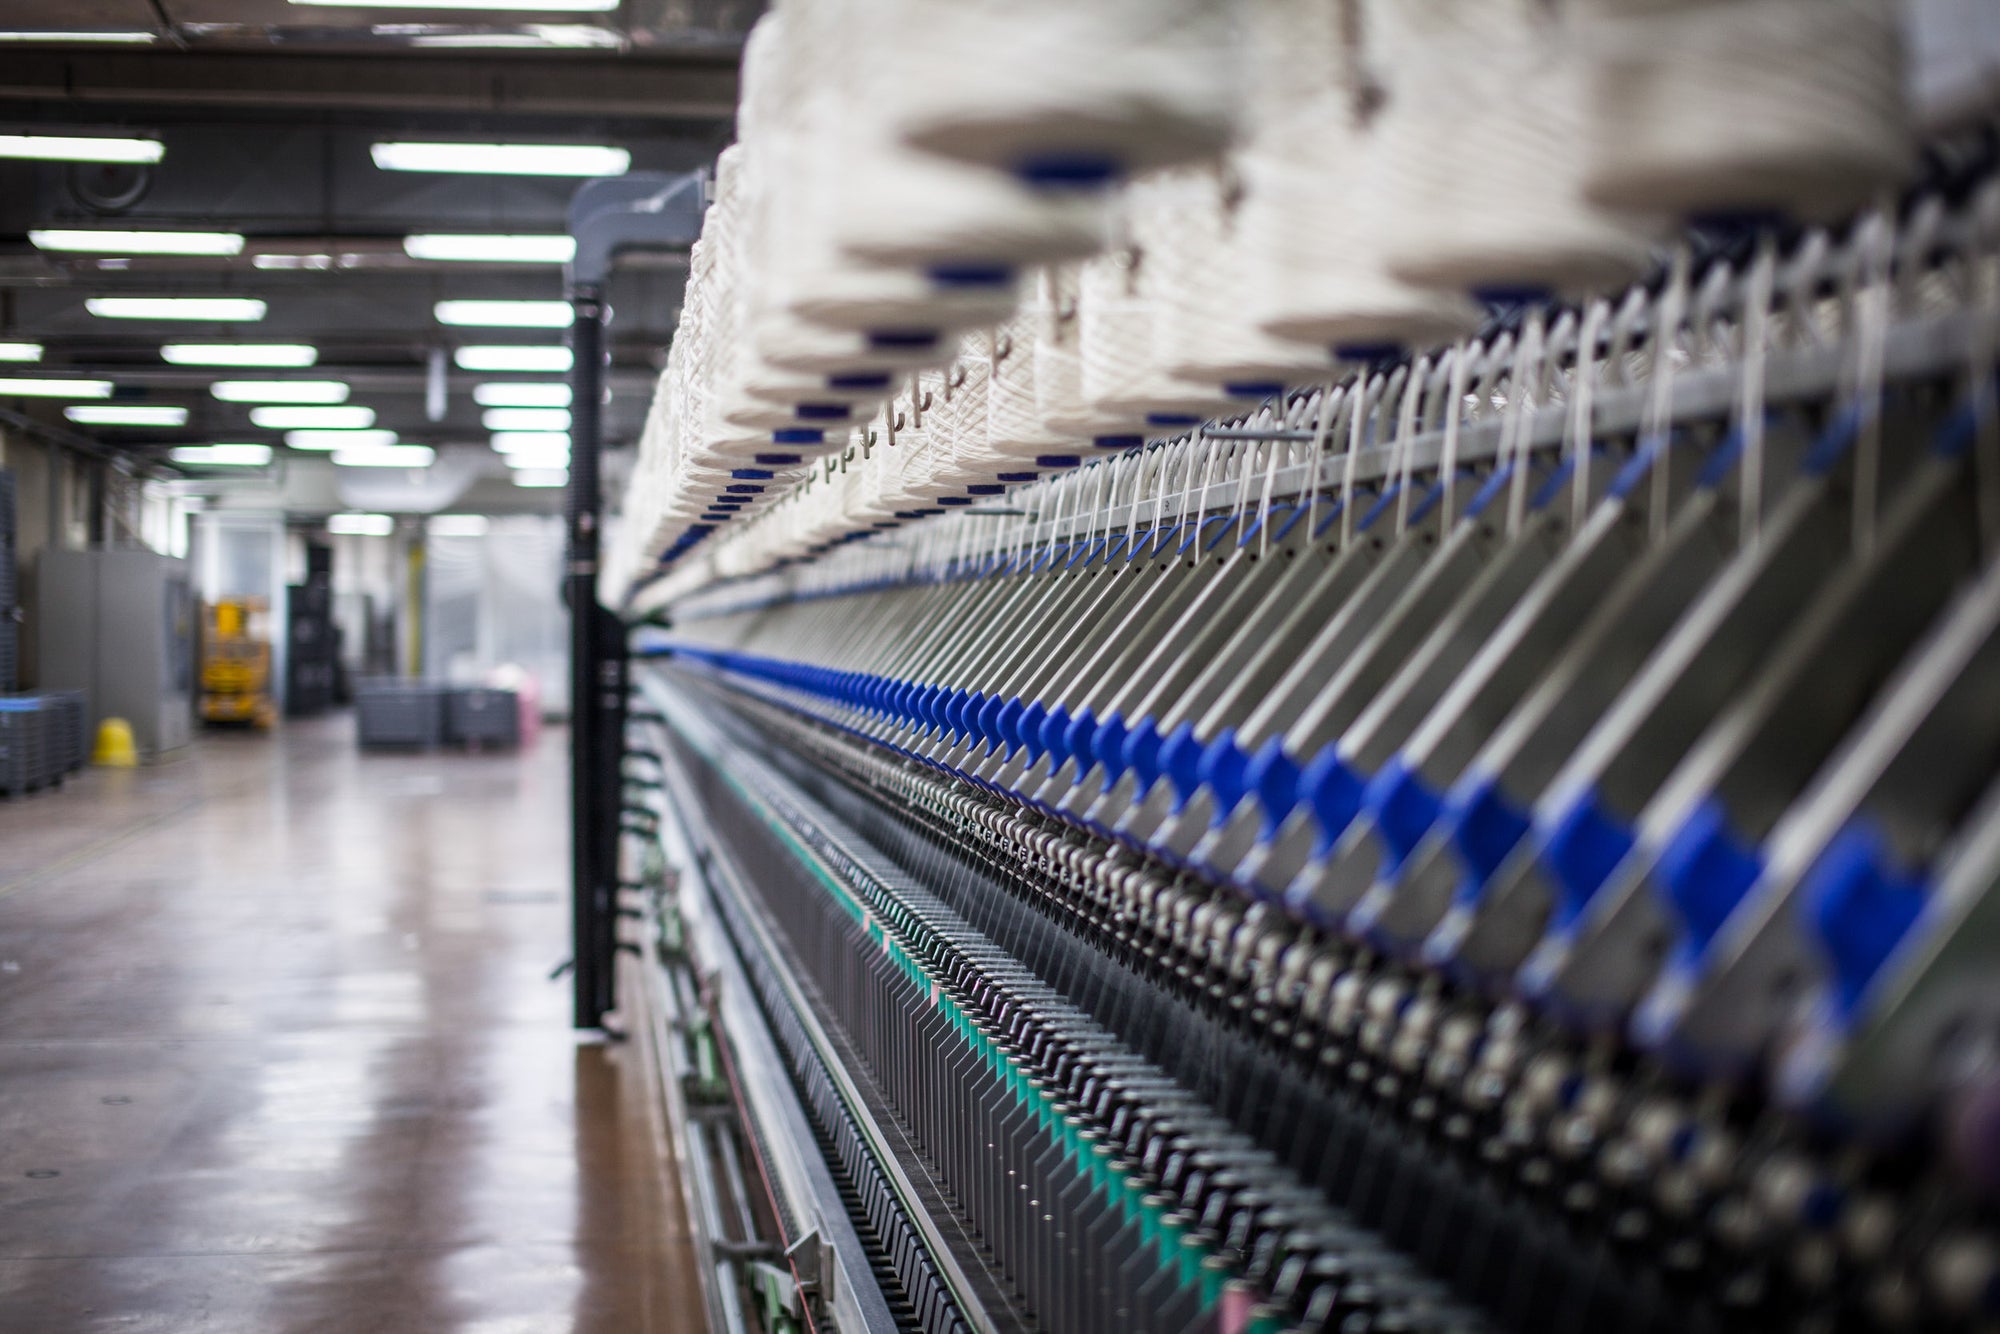 Production line of Merino wool spinning machines at facility in Valle Mosso